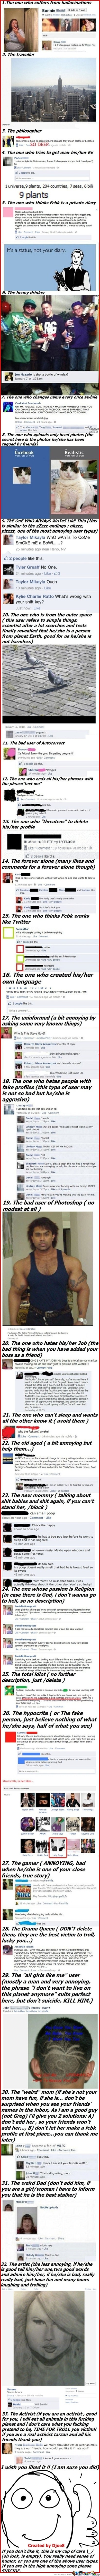 types of facebook on people. We all know these people.. enjoy .. yeah 19 is not photoshopped. but that guy did inject a of synthol (oil) in to this arms.